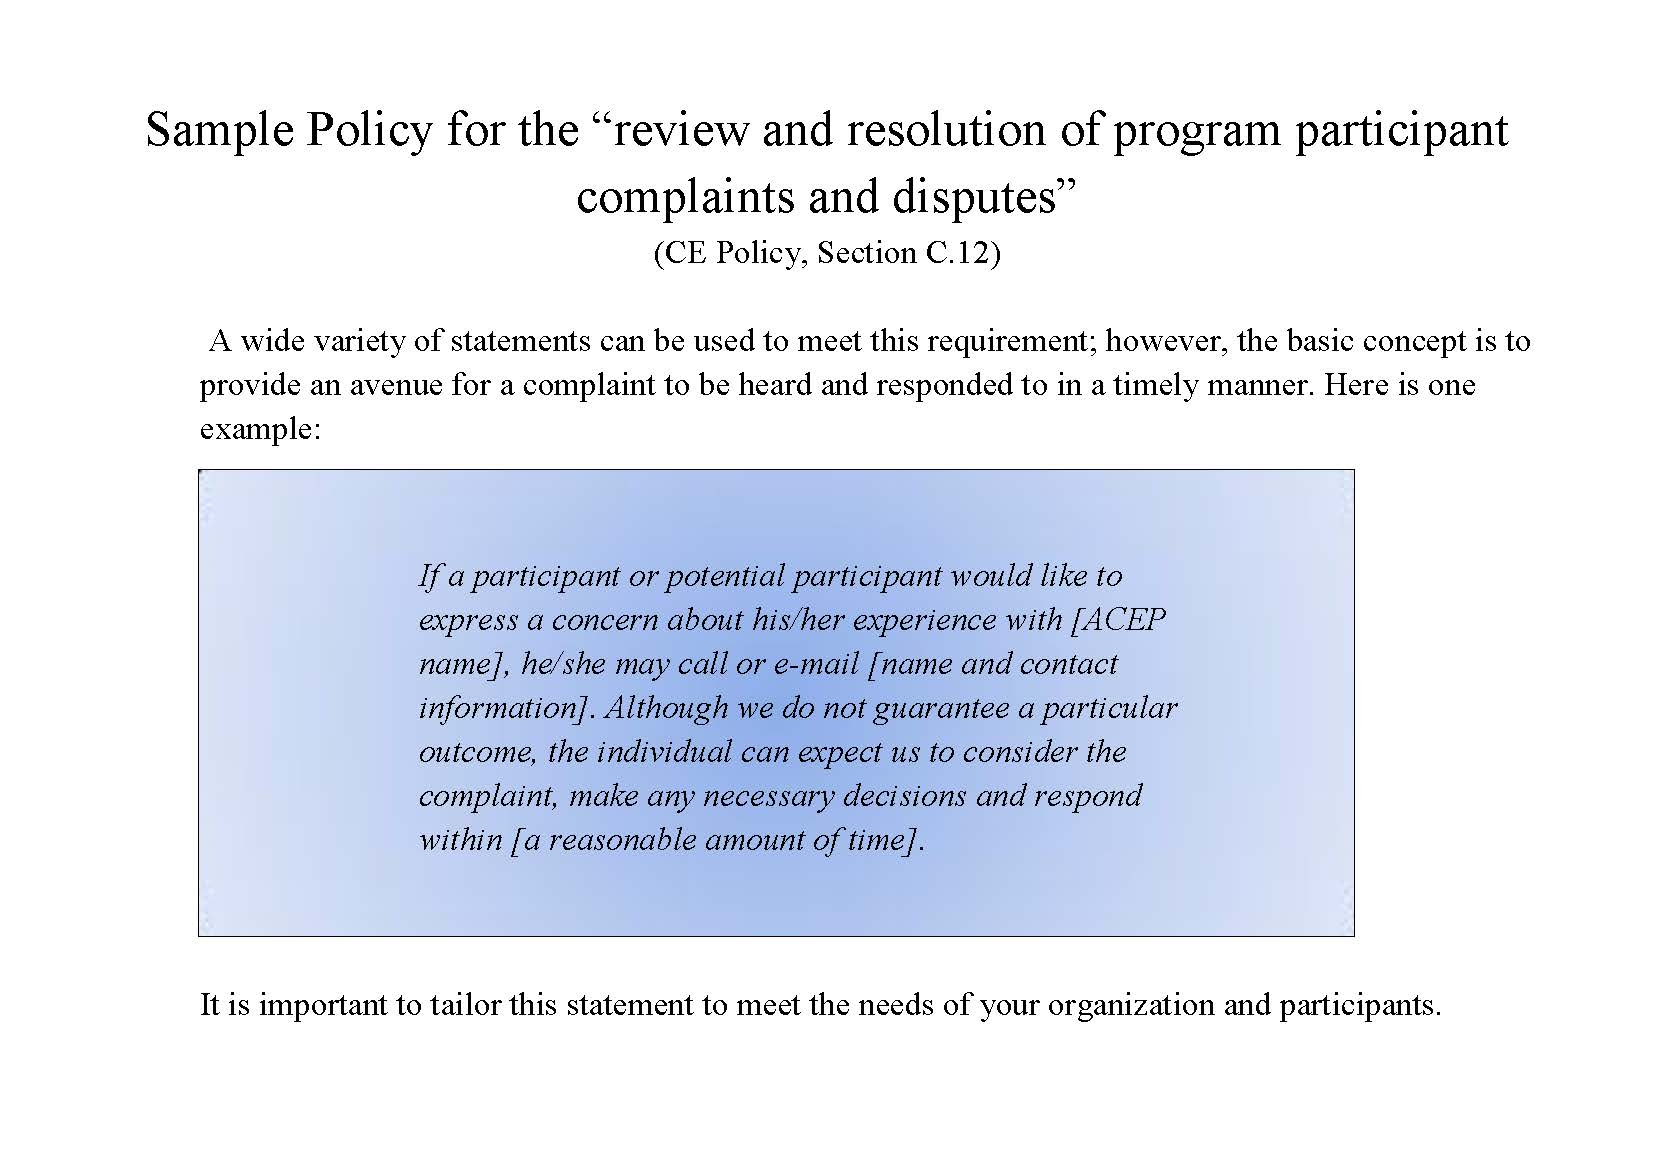 Policy for Complaints